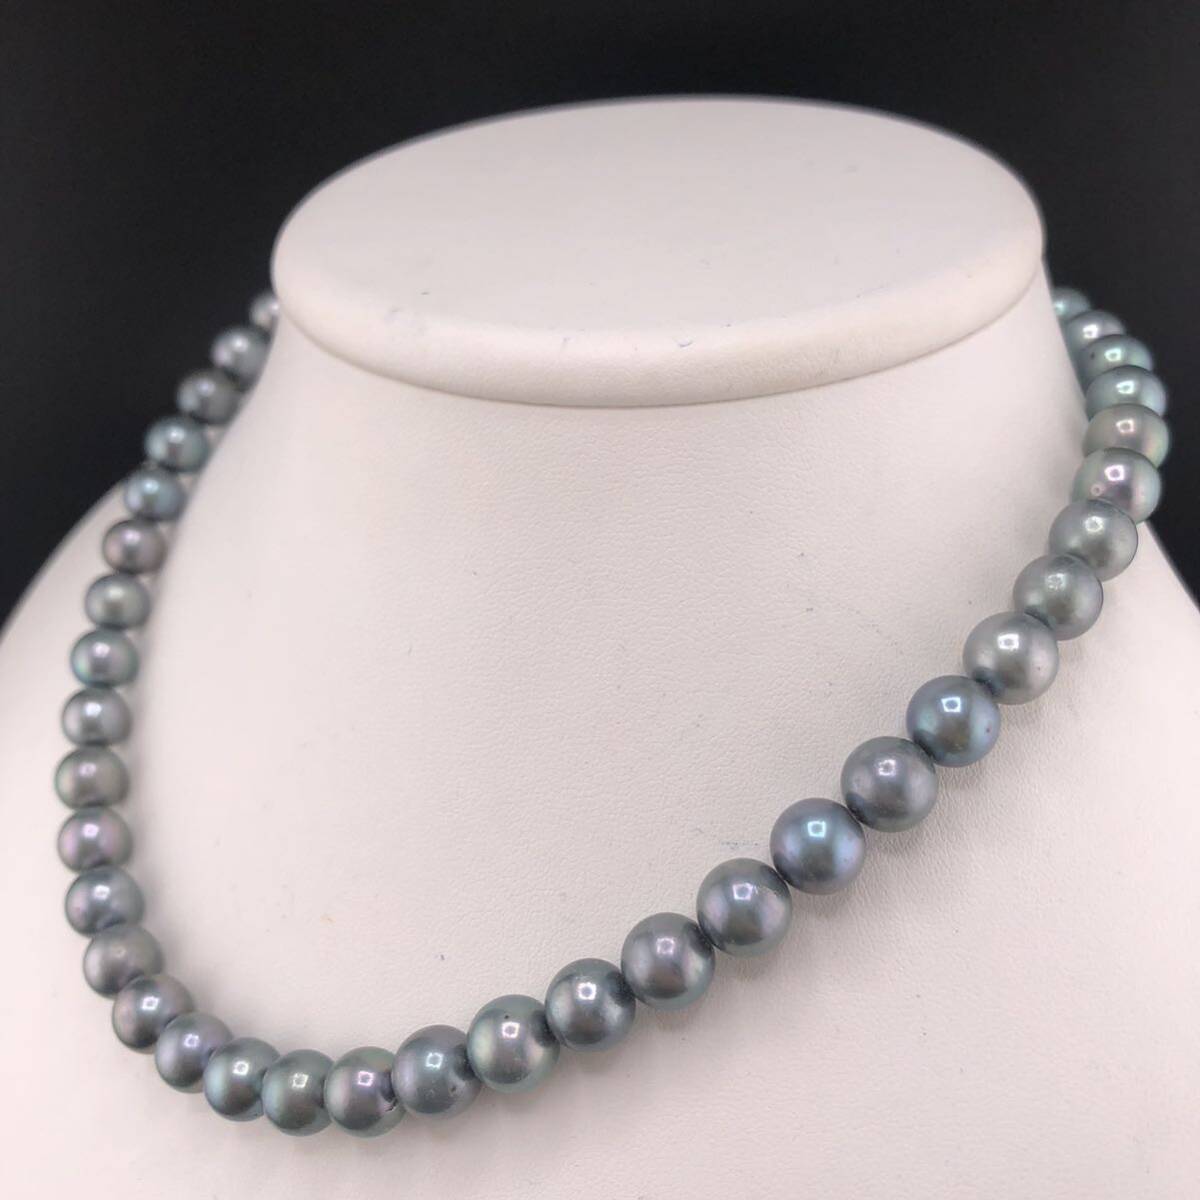 P04-0045 アコヤパールネックレス 8.5mm~9.0mm 40cm 46.9g ( アコヤ真珠 Pearl necklace SILVER )_画像2